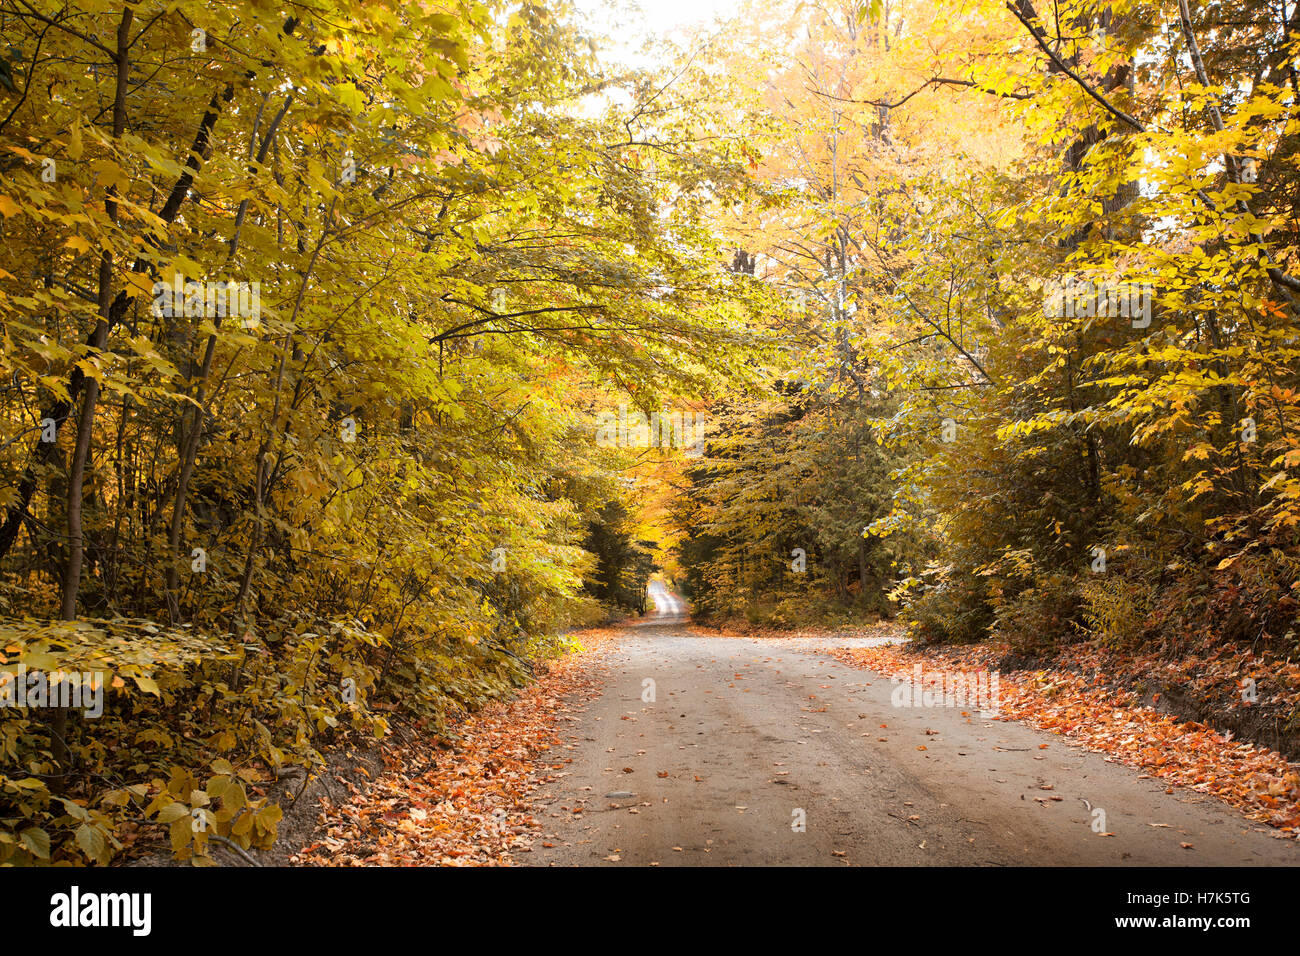 road through an autumn forest with trees changing leaves colors Stock Photo